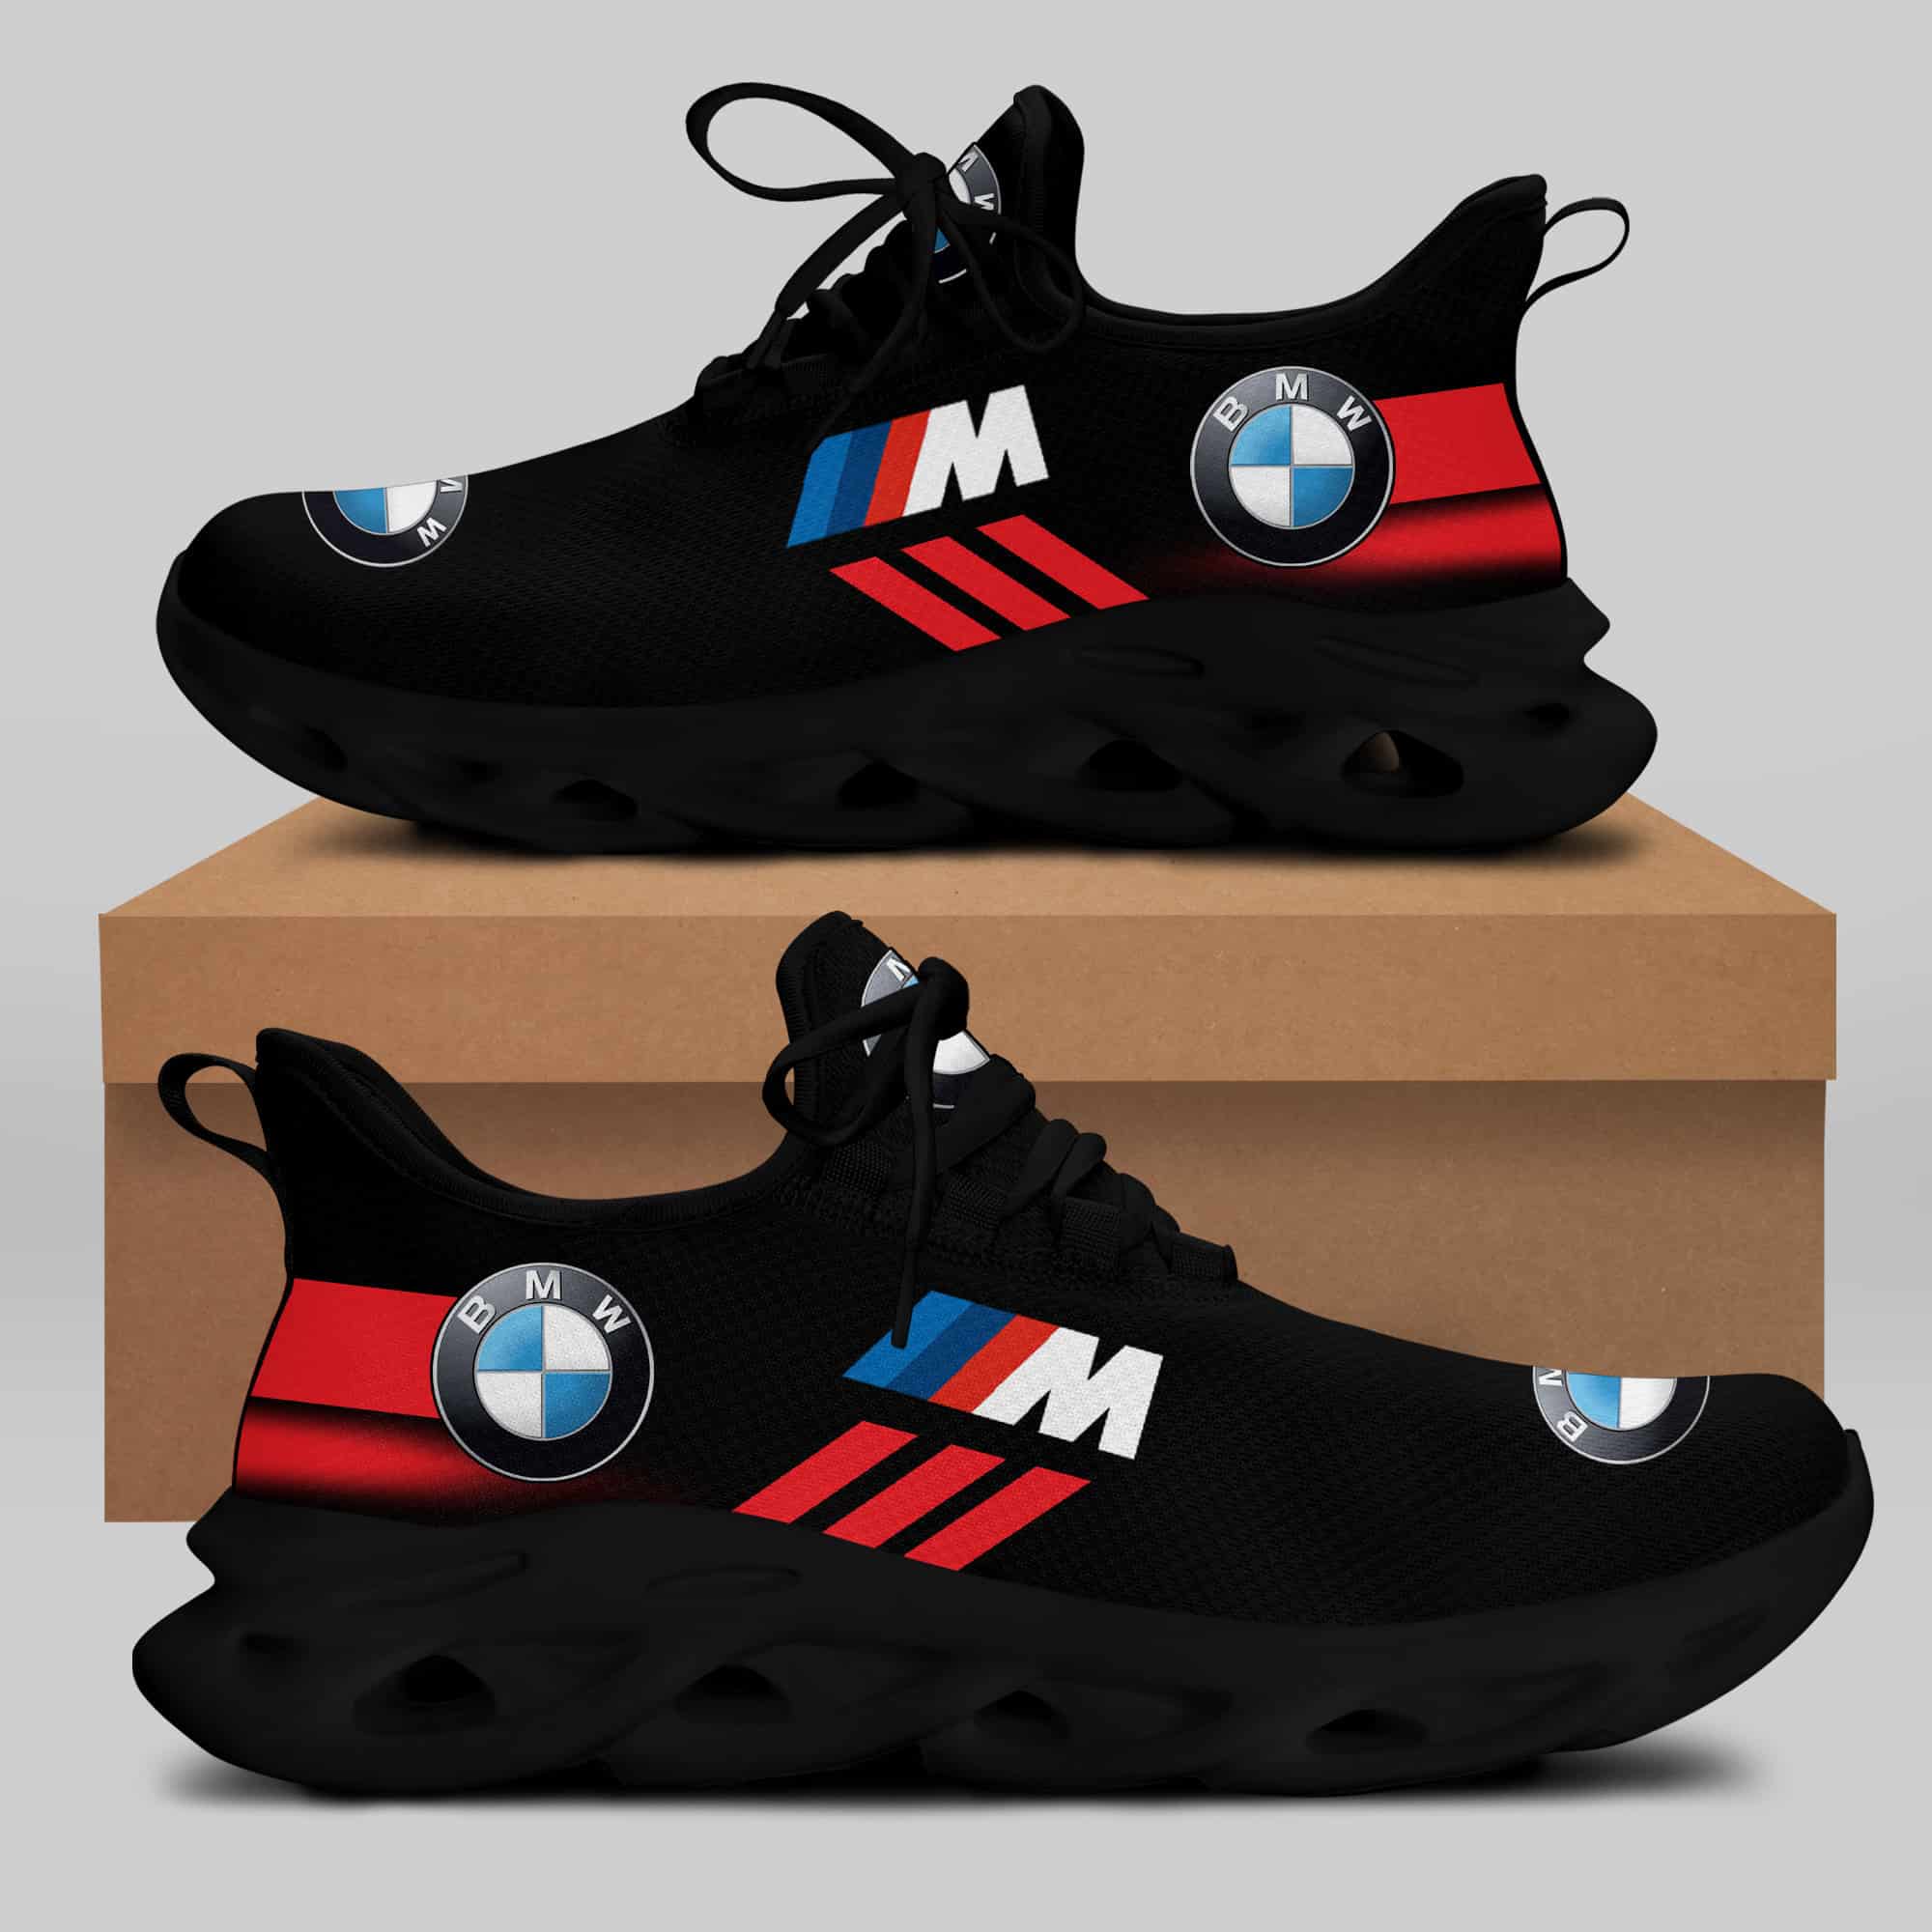 Bmw M Running Shoes Max Soul Shoes Sneakers Ver 6 1